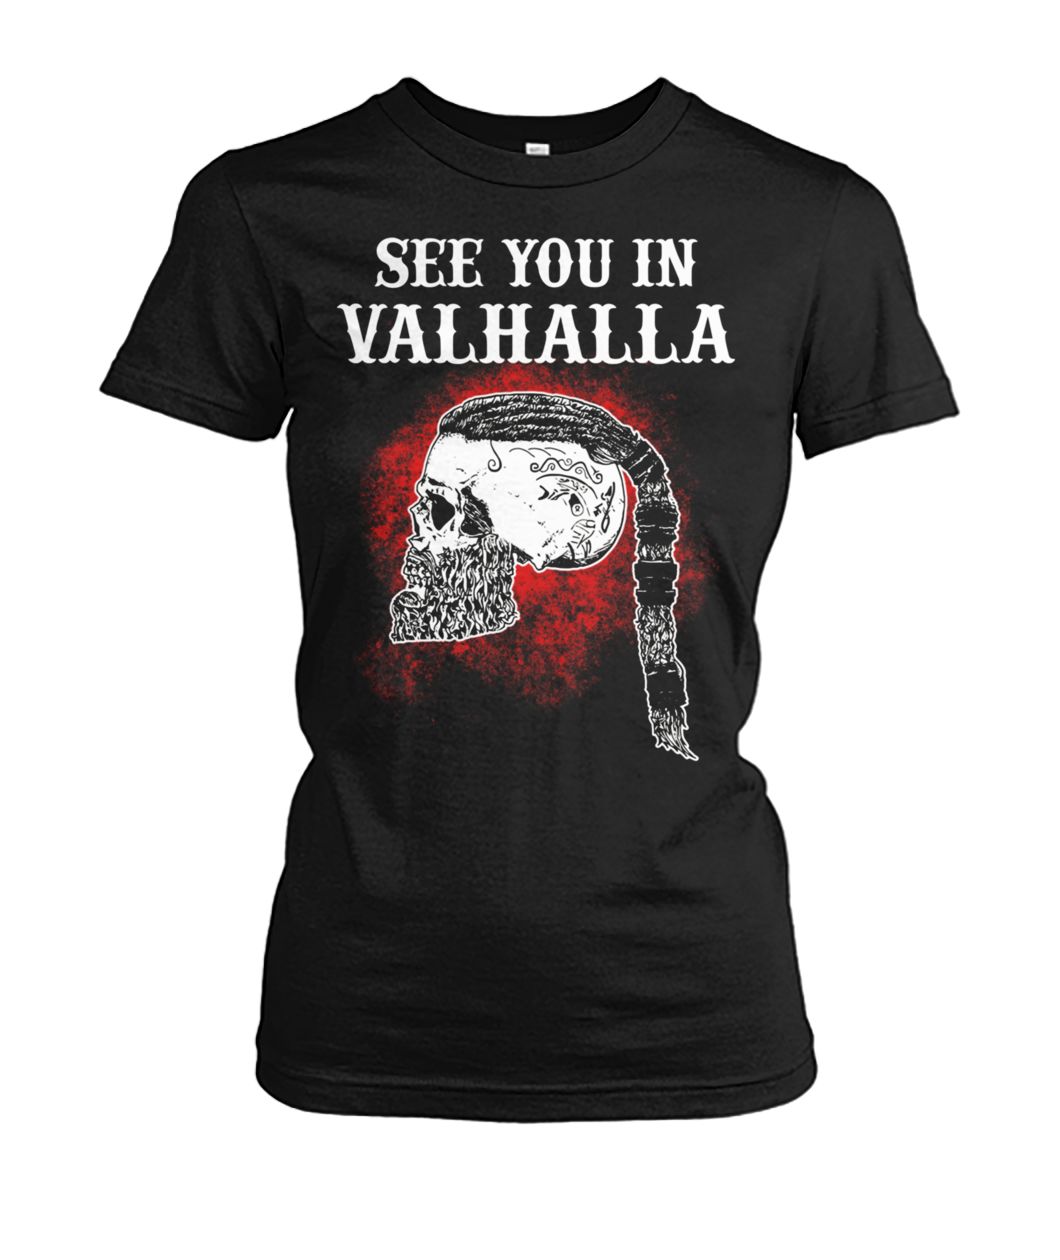 Viking see you in valhalla women's crew tee